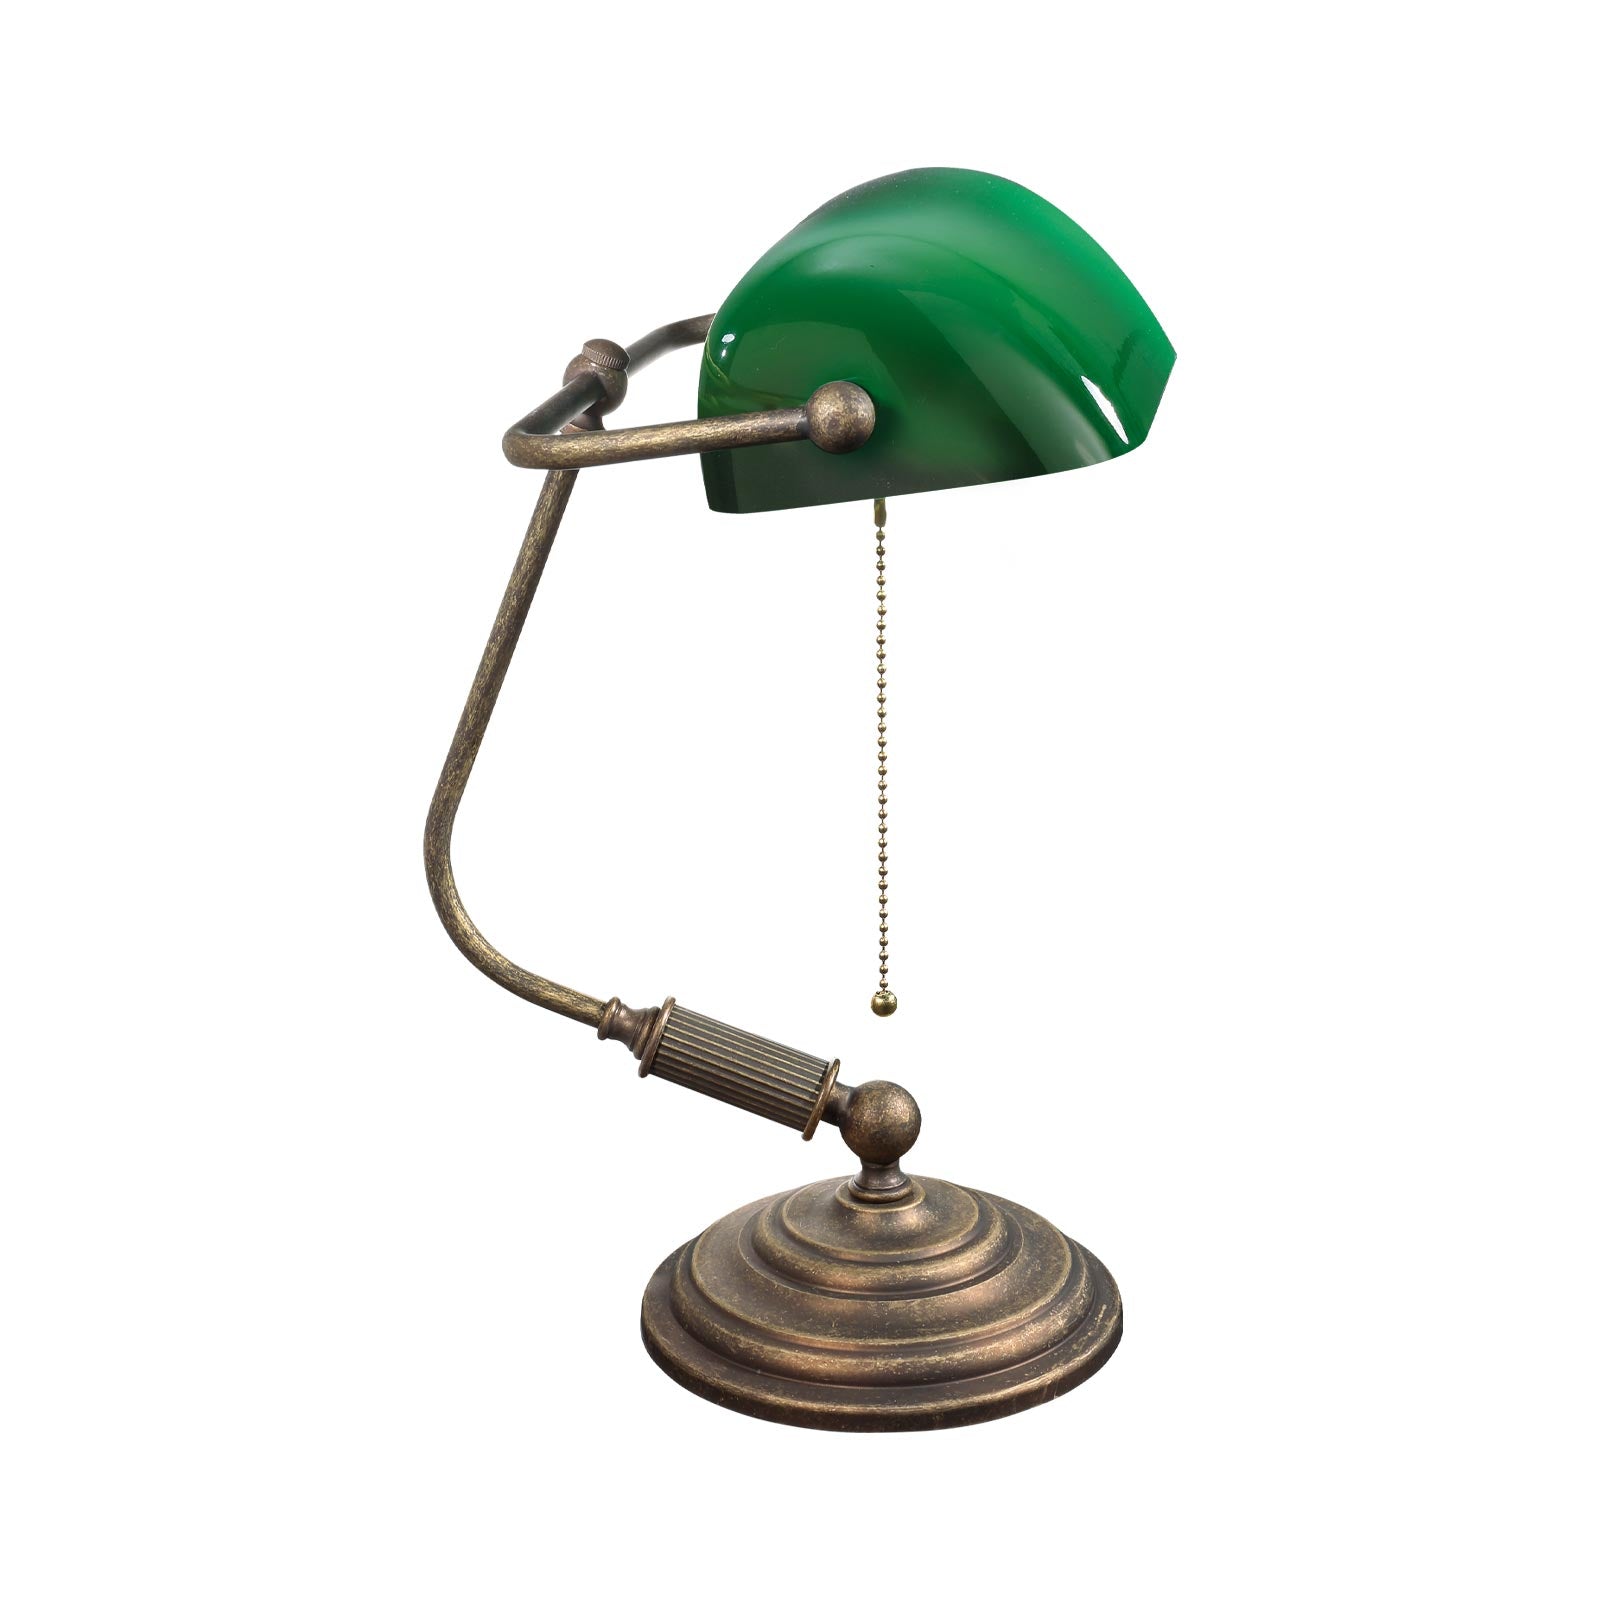 Brass Desk top Bankers Lamp with green glass, English Decorations